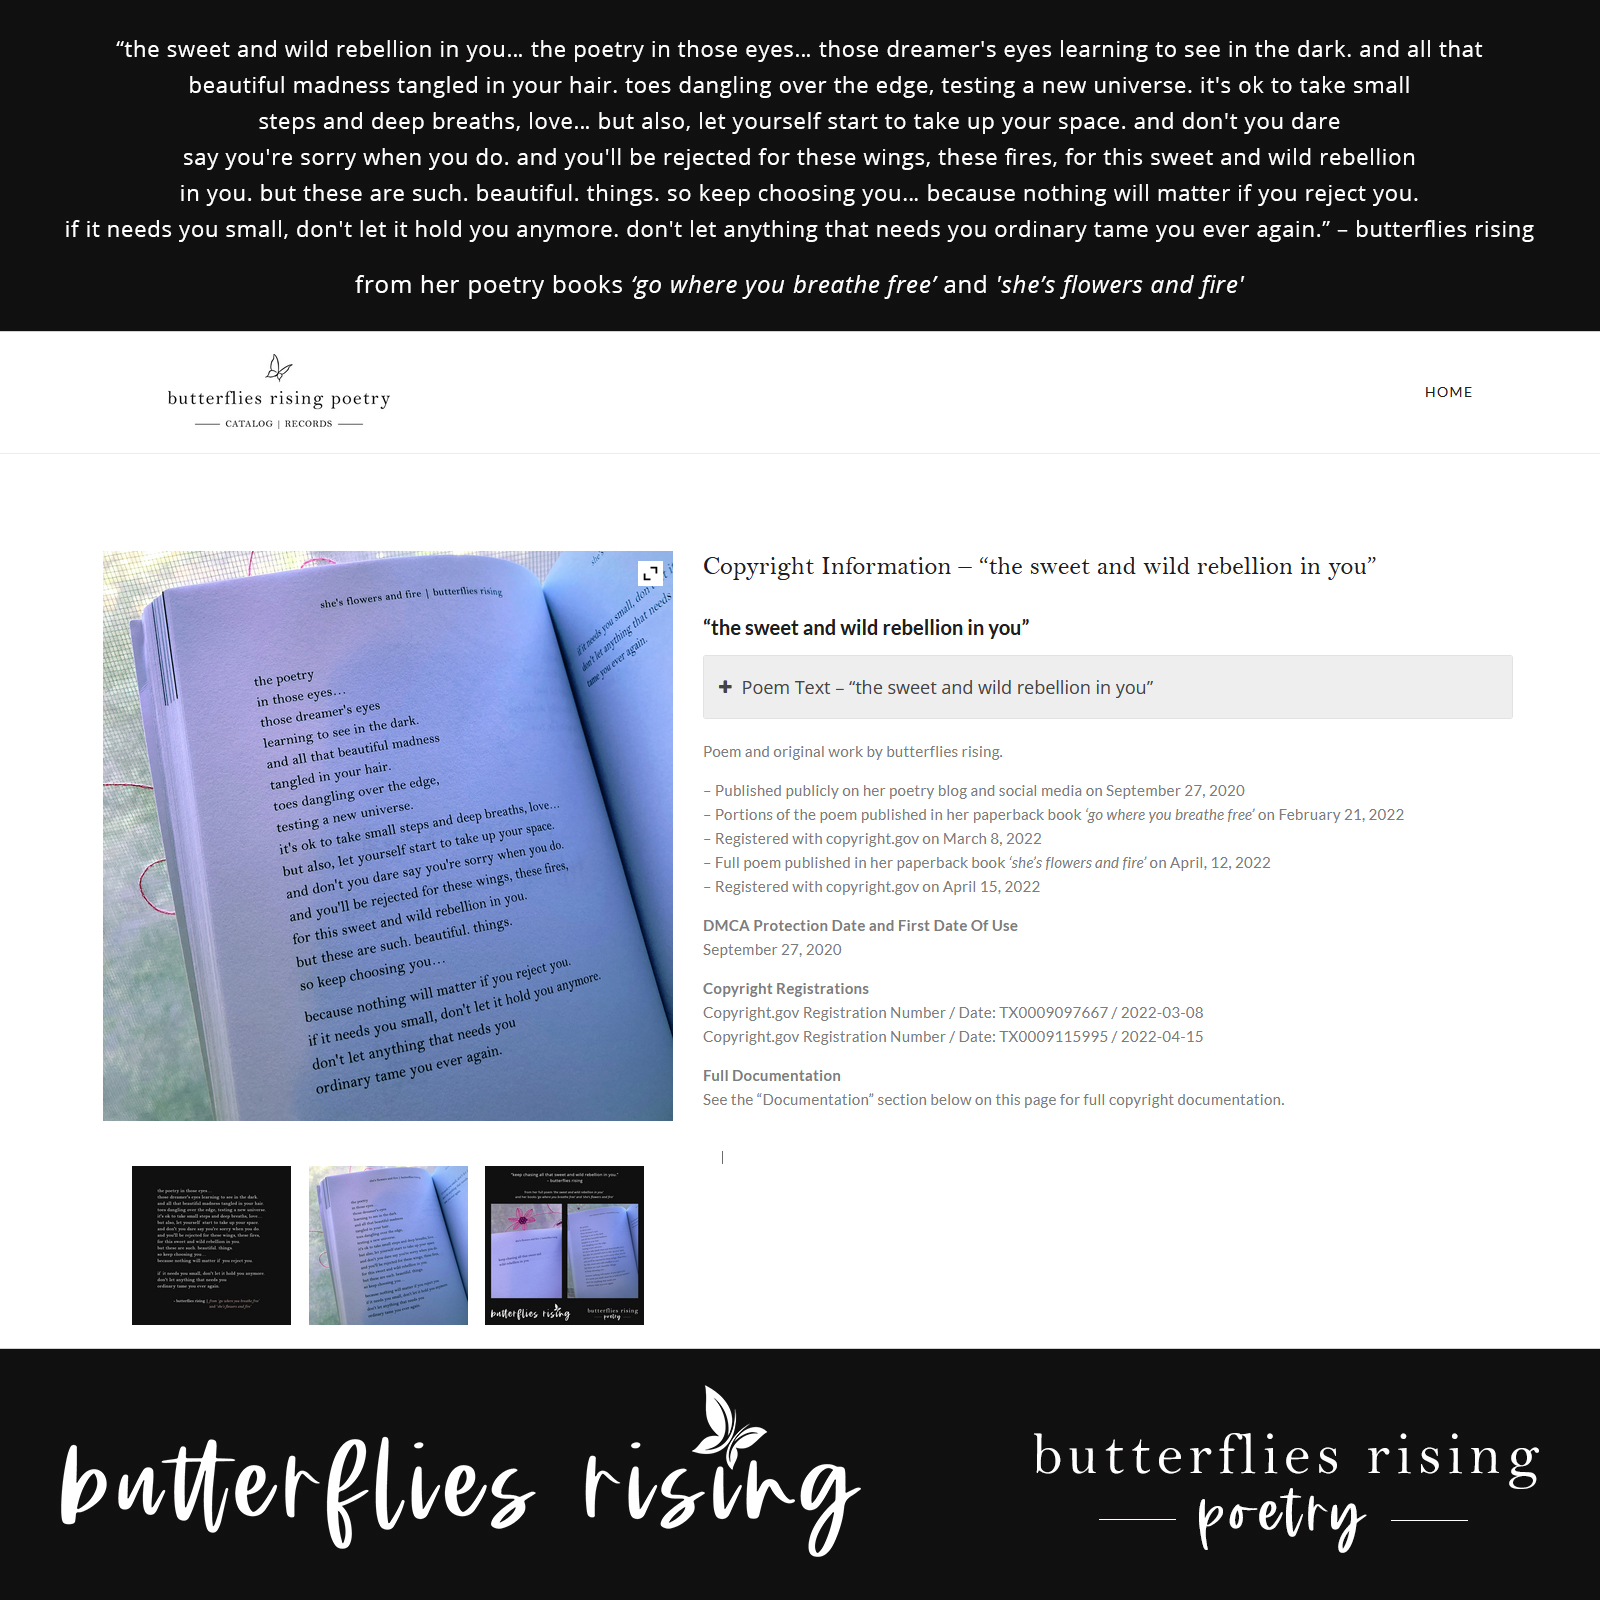 keep chasing all that sweet and wild rebellion in you - butterflies rising poem